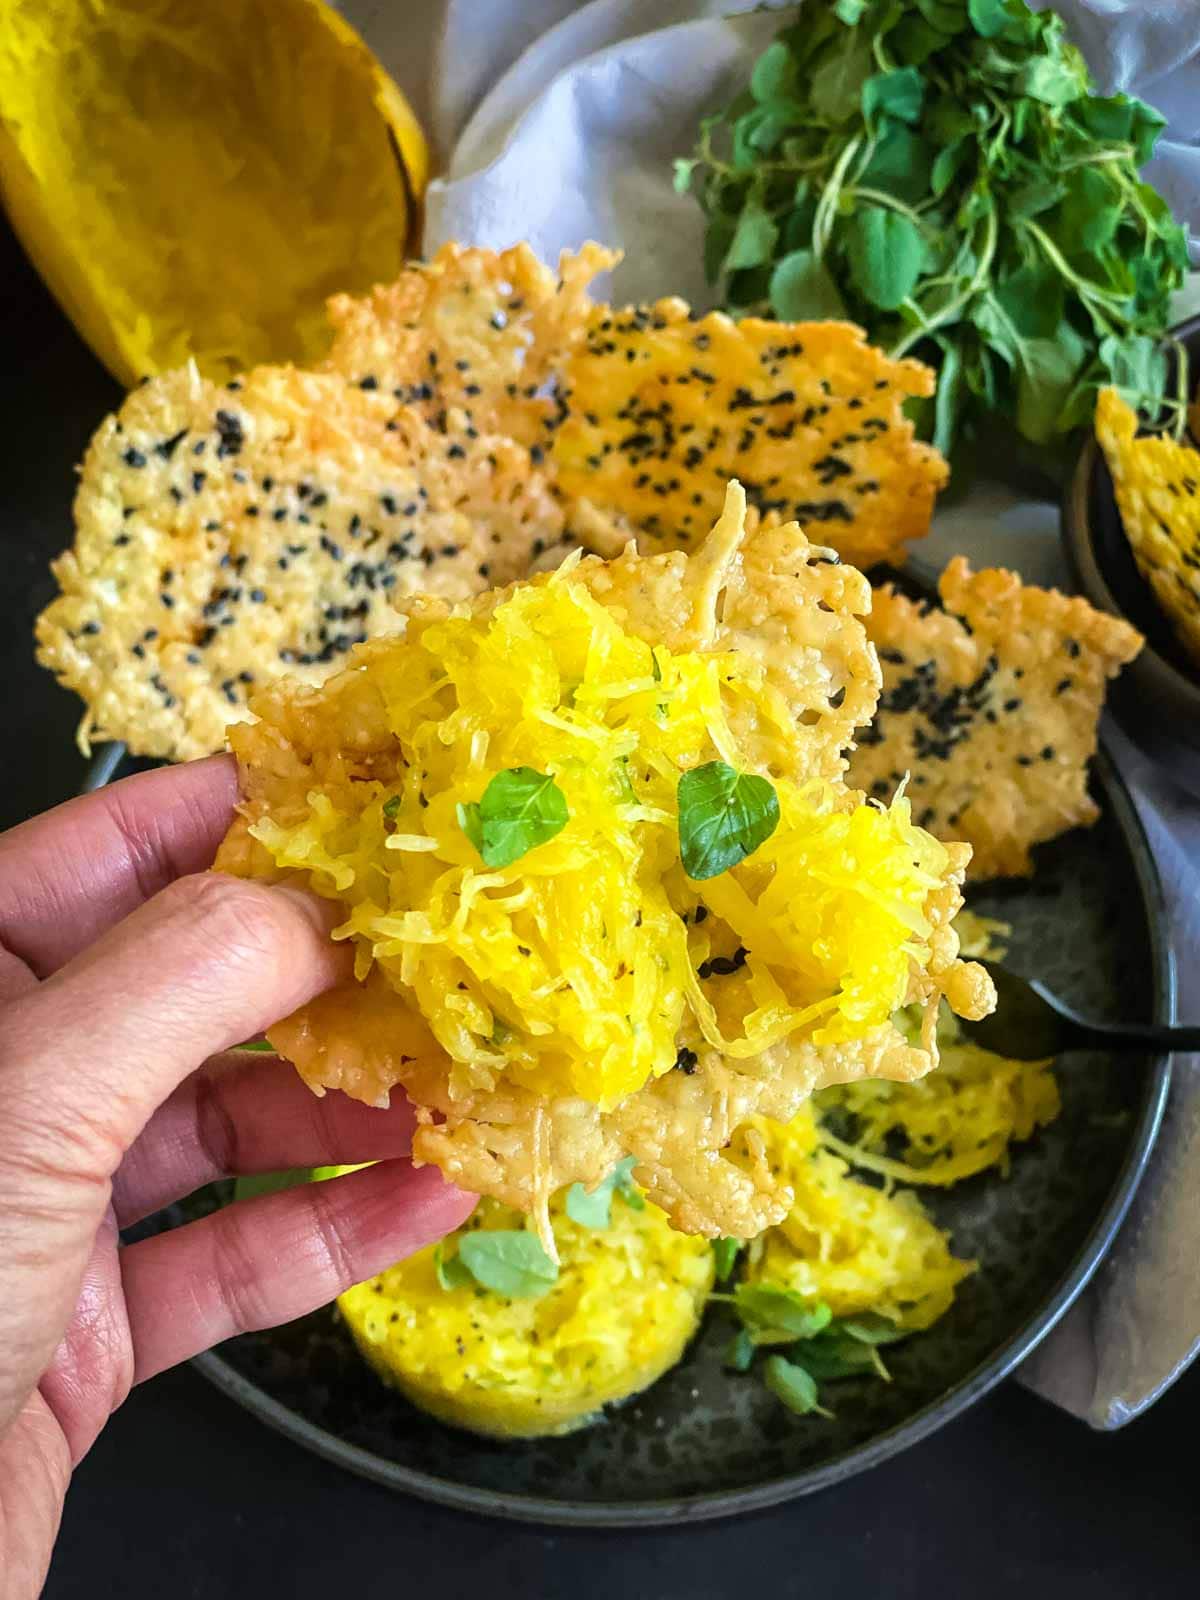 Hand lifting a serve of the buttered spaghetti squash onto a parmesan crisp